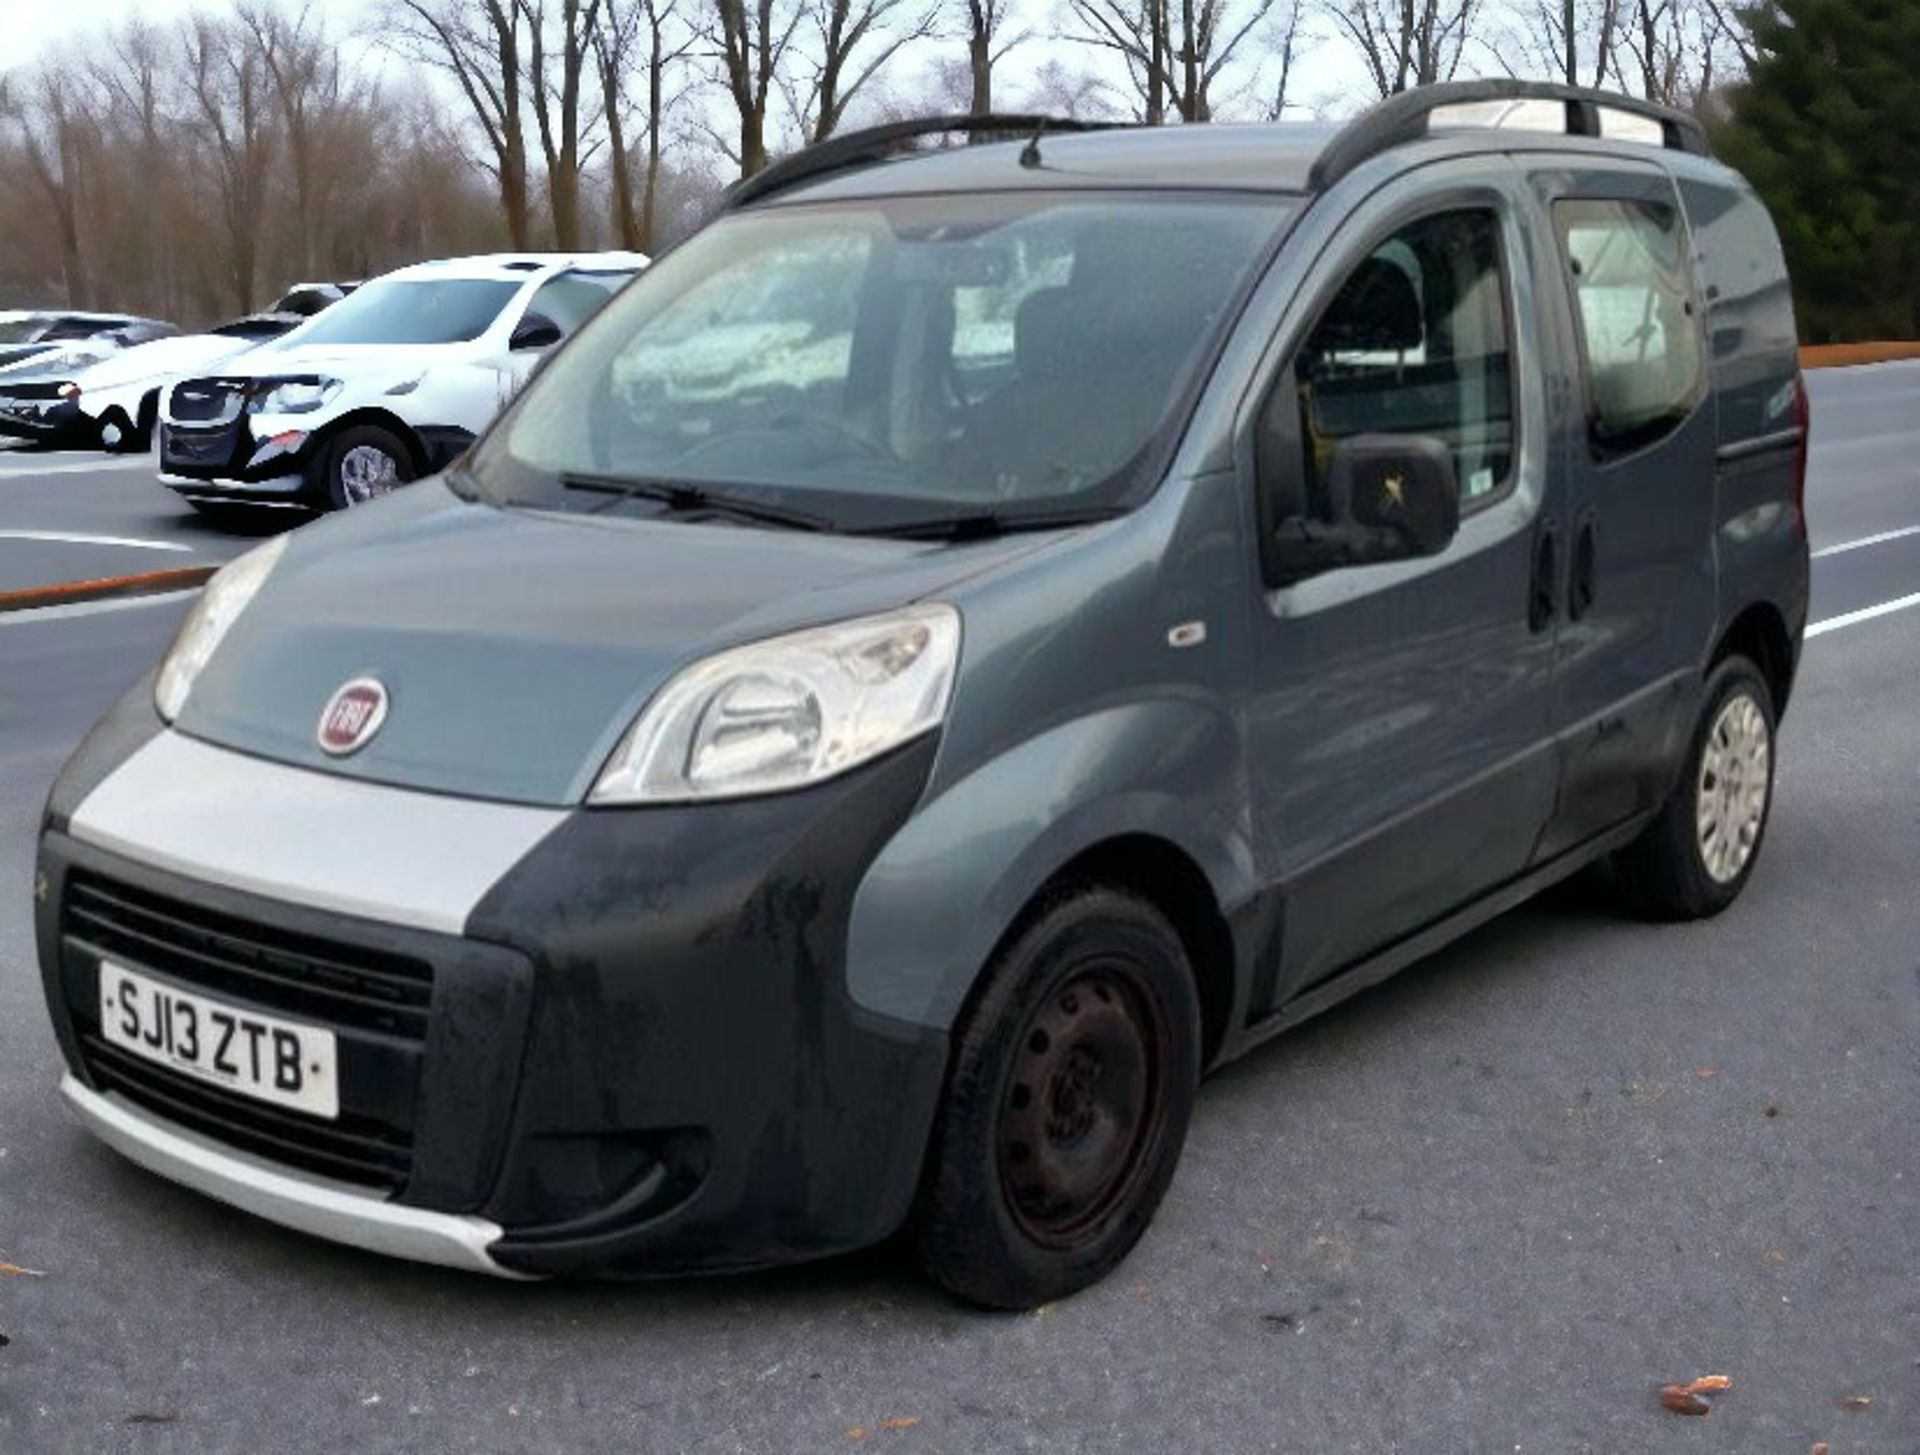 2013 FIAT FIORINO 16V ADVENTURE MULTIJET CREW VAN HPI CLEAR -(ONLY 76 K MILES ) - READY TO GO! - Image 5 of 11